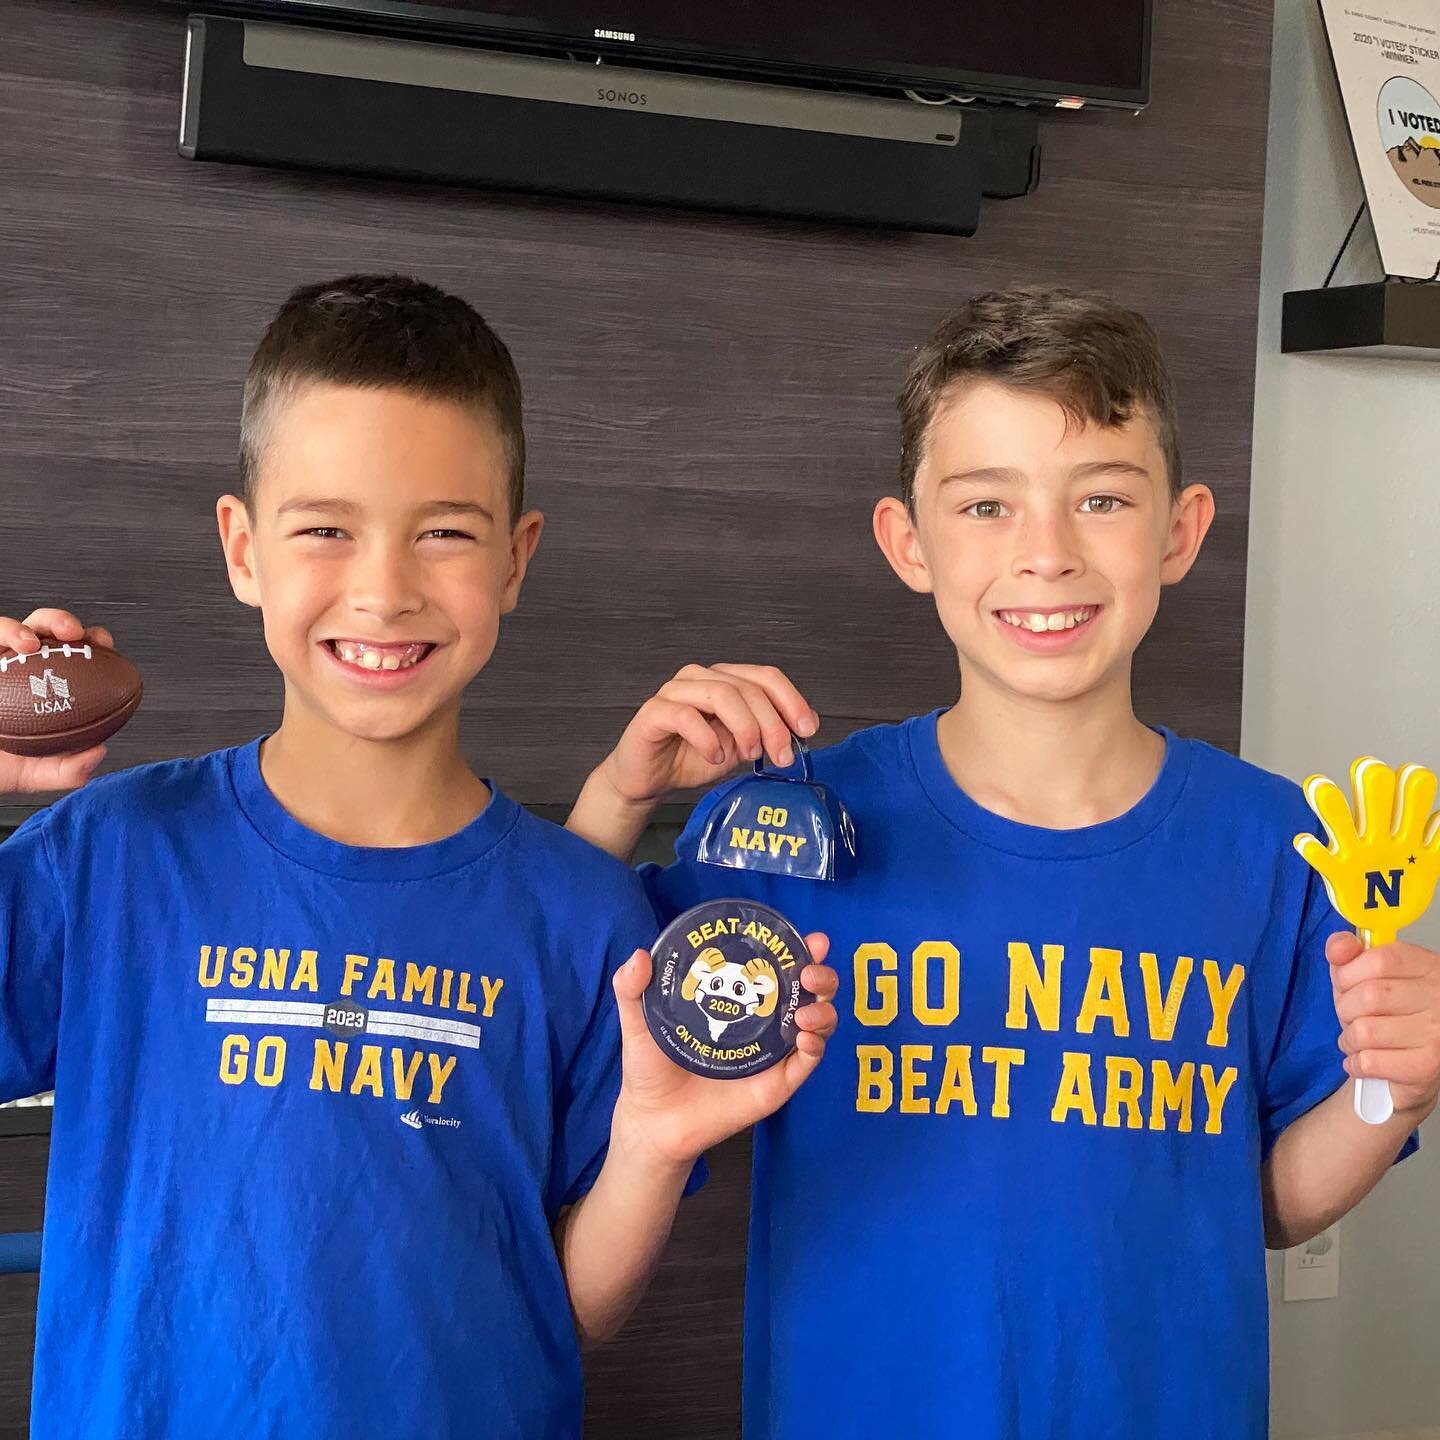 They love the fun surprise gear their older siblings got in the mail for participating in a button design contest for the USNA Alumni Association and Foundation! We also won 2nd place surprisingly during Trivia Night, so we&rsquo;ll see what surprise